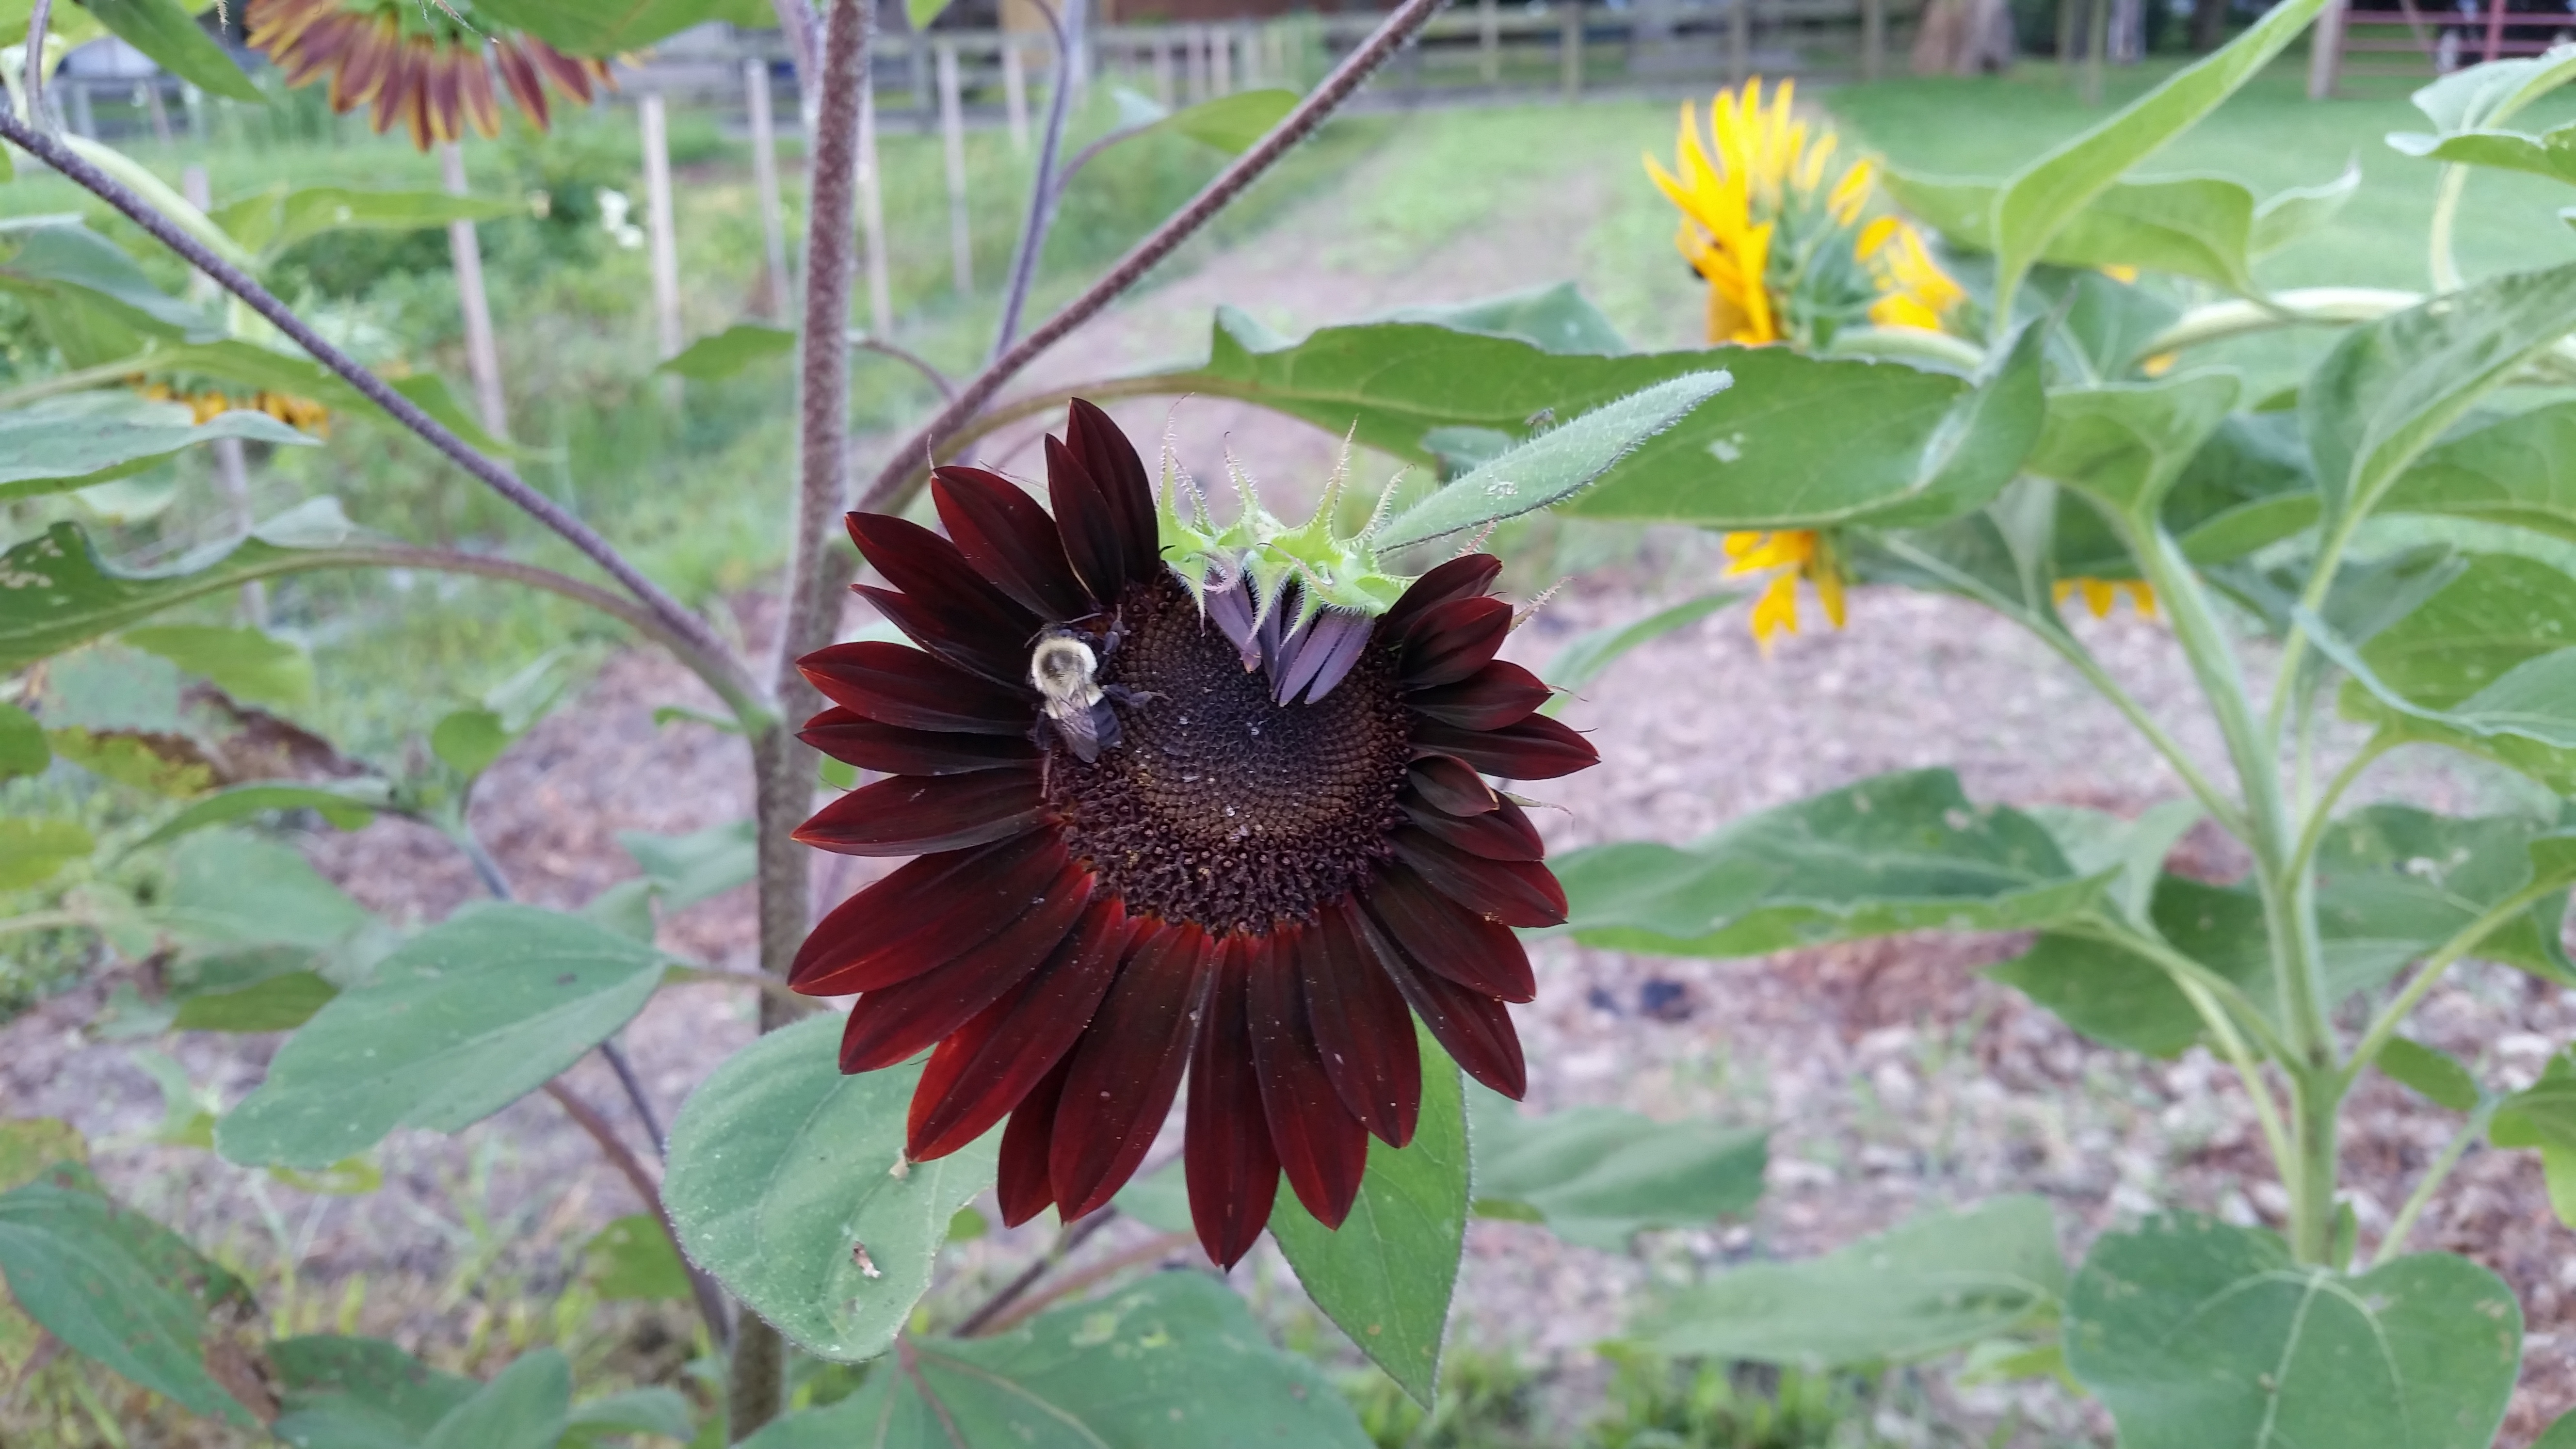 How-to Grow Sunflowers with Small or Big Blooms